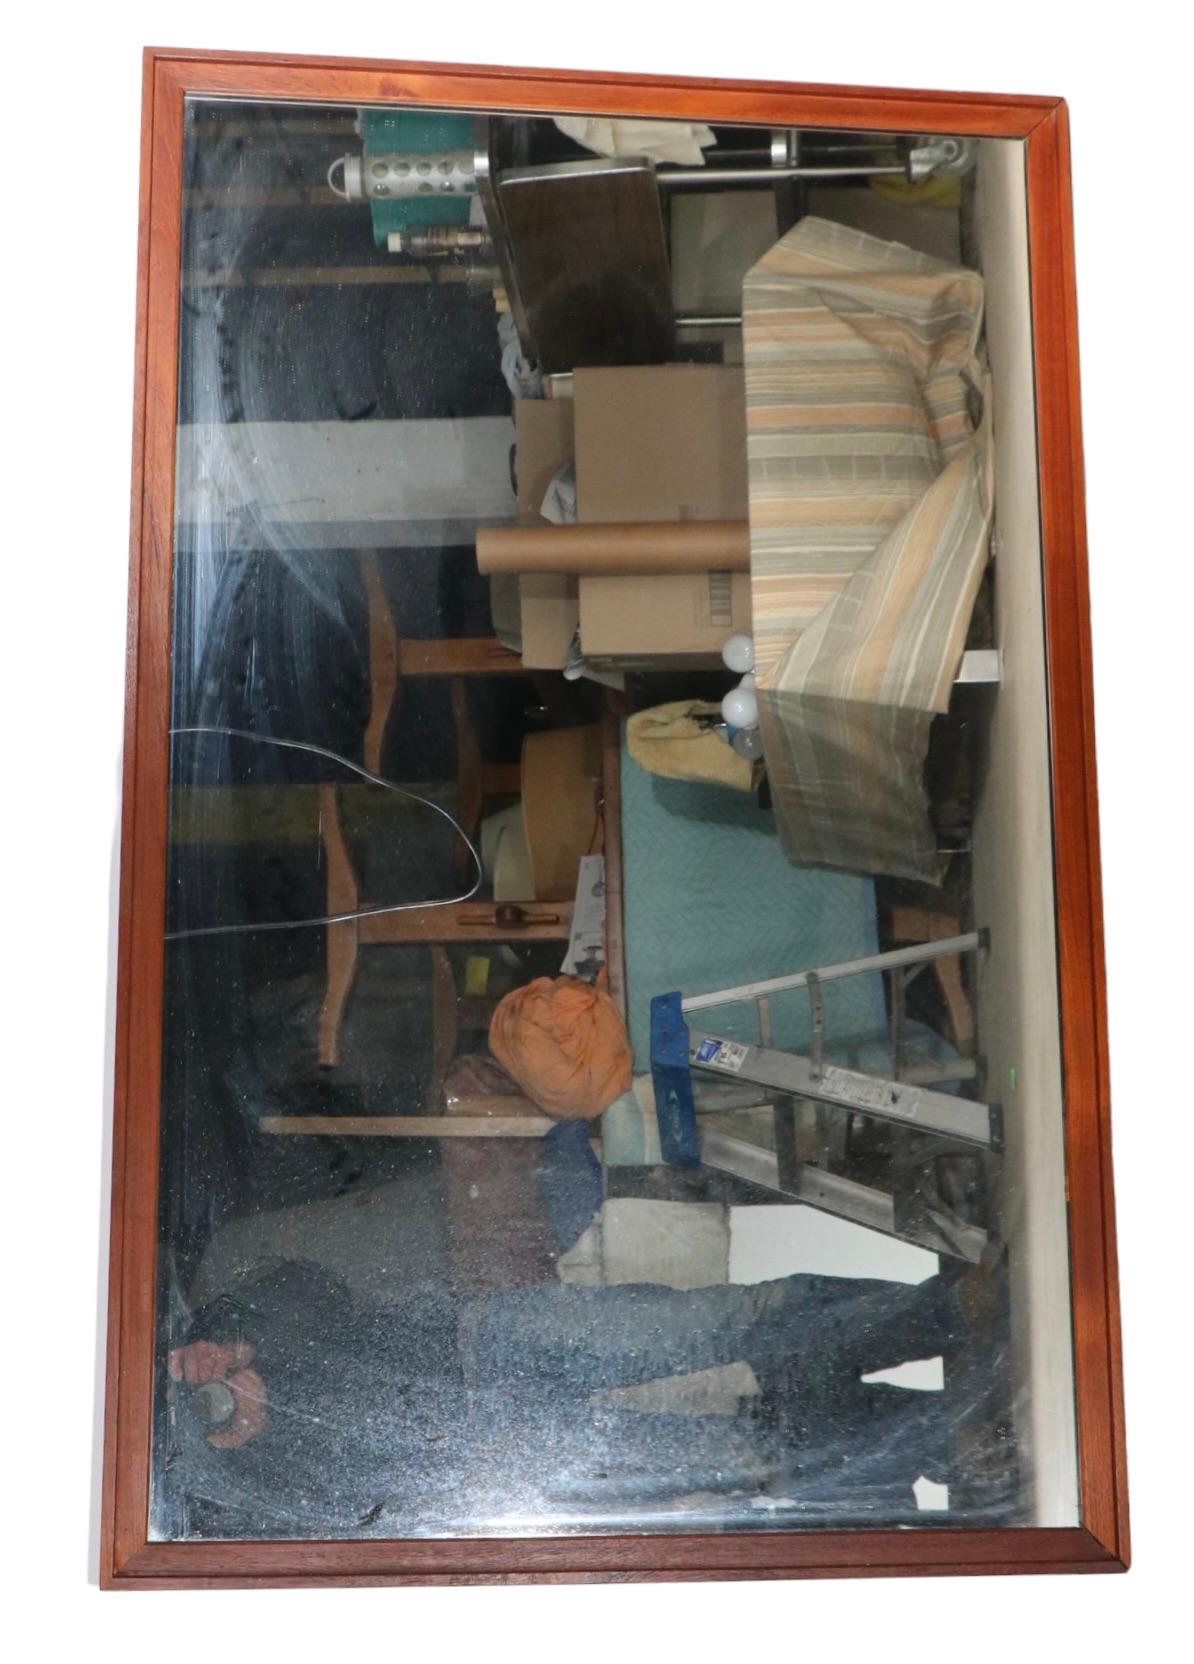 Sophisticated architectural wall mirror by noted danish maker, Falster Mobelfabrik. The solid wood frame surrounds a bright plate glass mirror, this example is in very fine, original, clean and ready to install condition. The mirror  can hang either